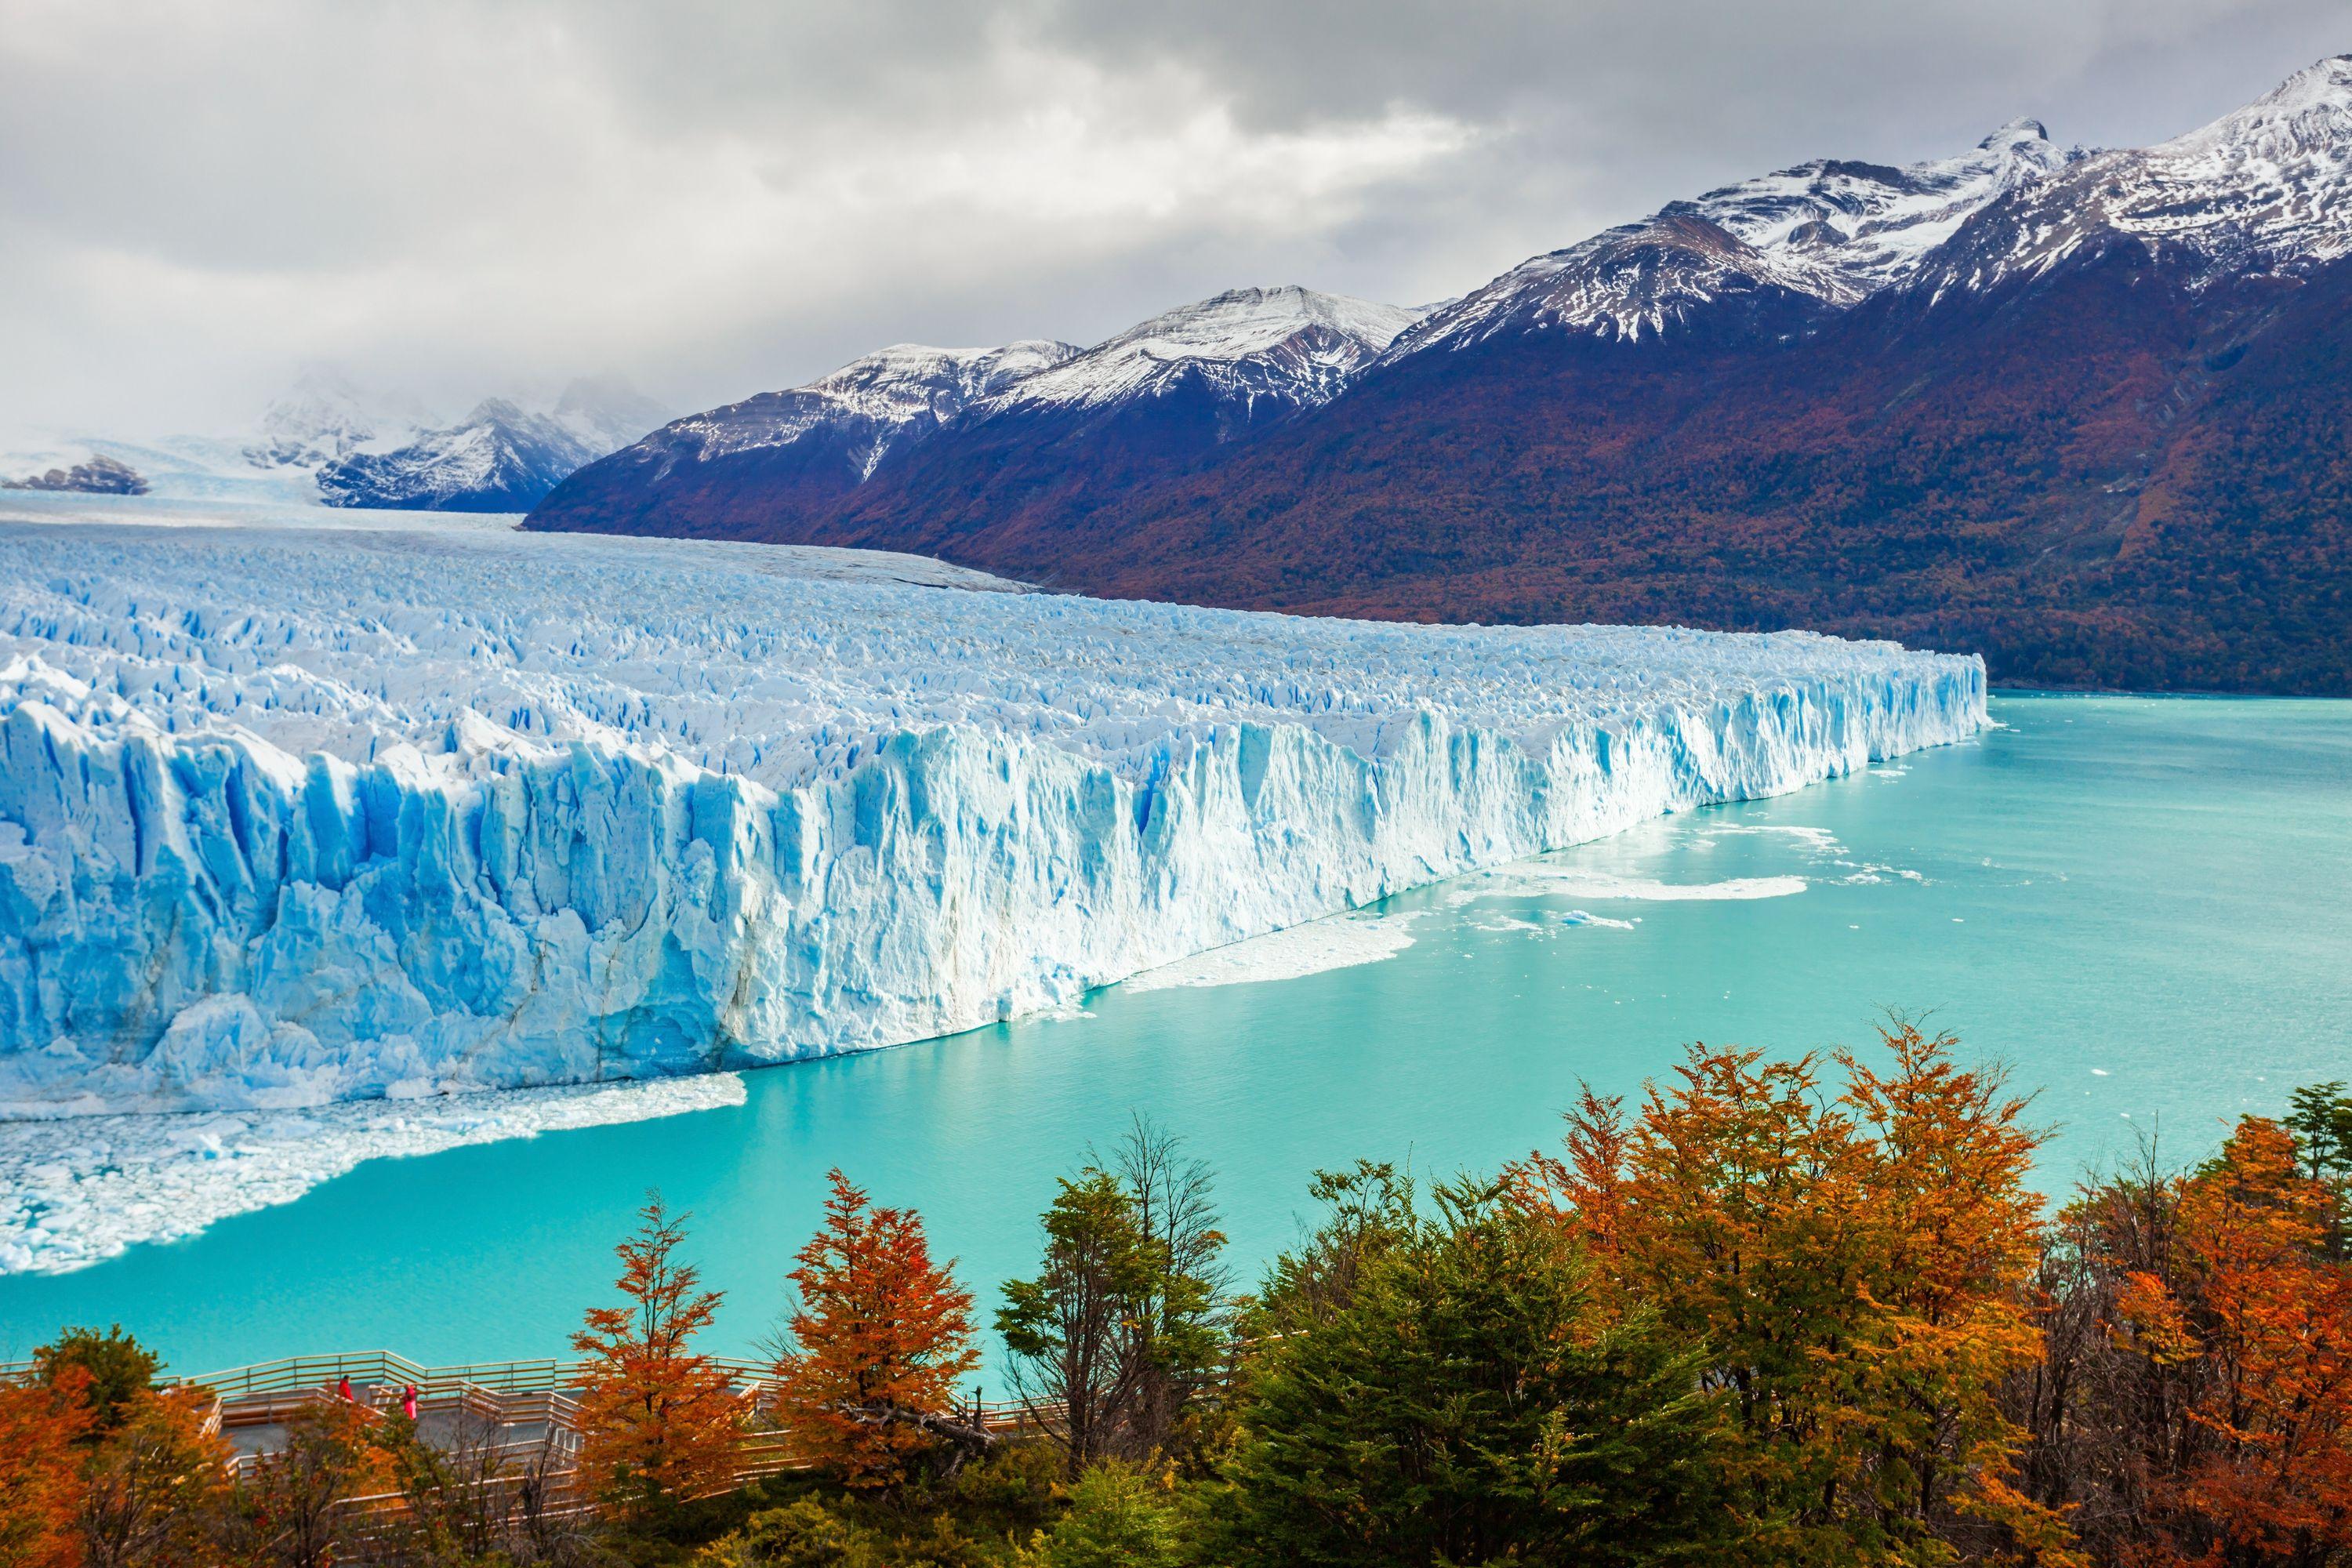 Car Rentals in Patagonia from C$ 30/day - Search for Rental Cars